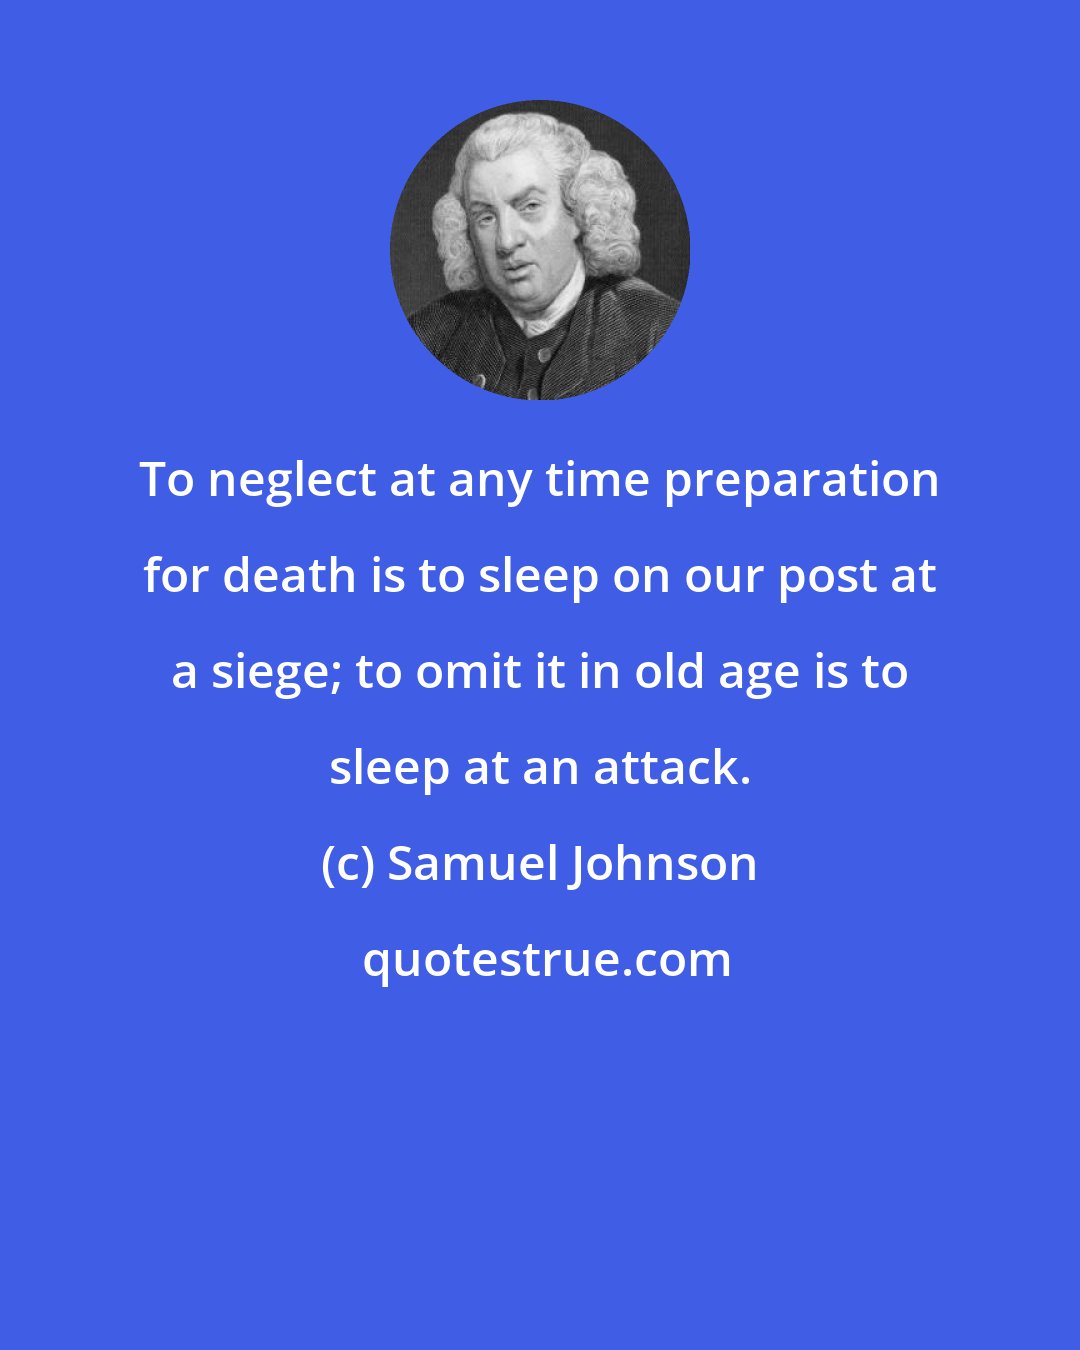 Samuel Johnson: To neglect at any time preparation for death is to sleep on our post at a siege; to omit it in old age is to sleep at an attack.